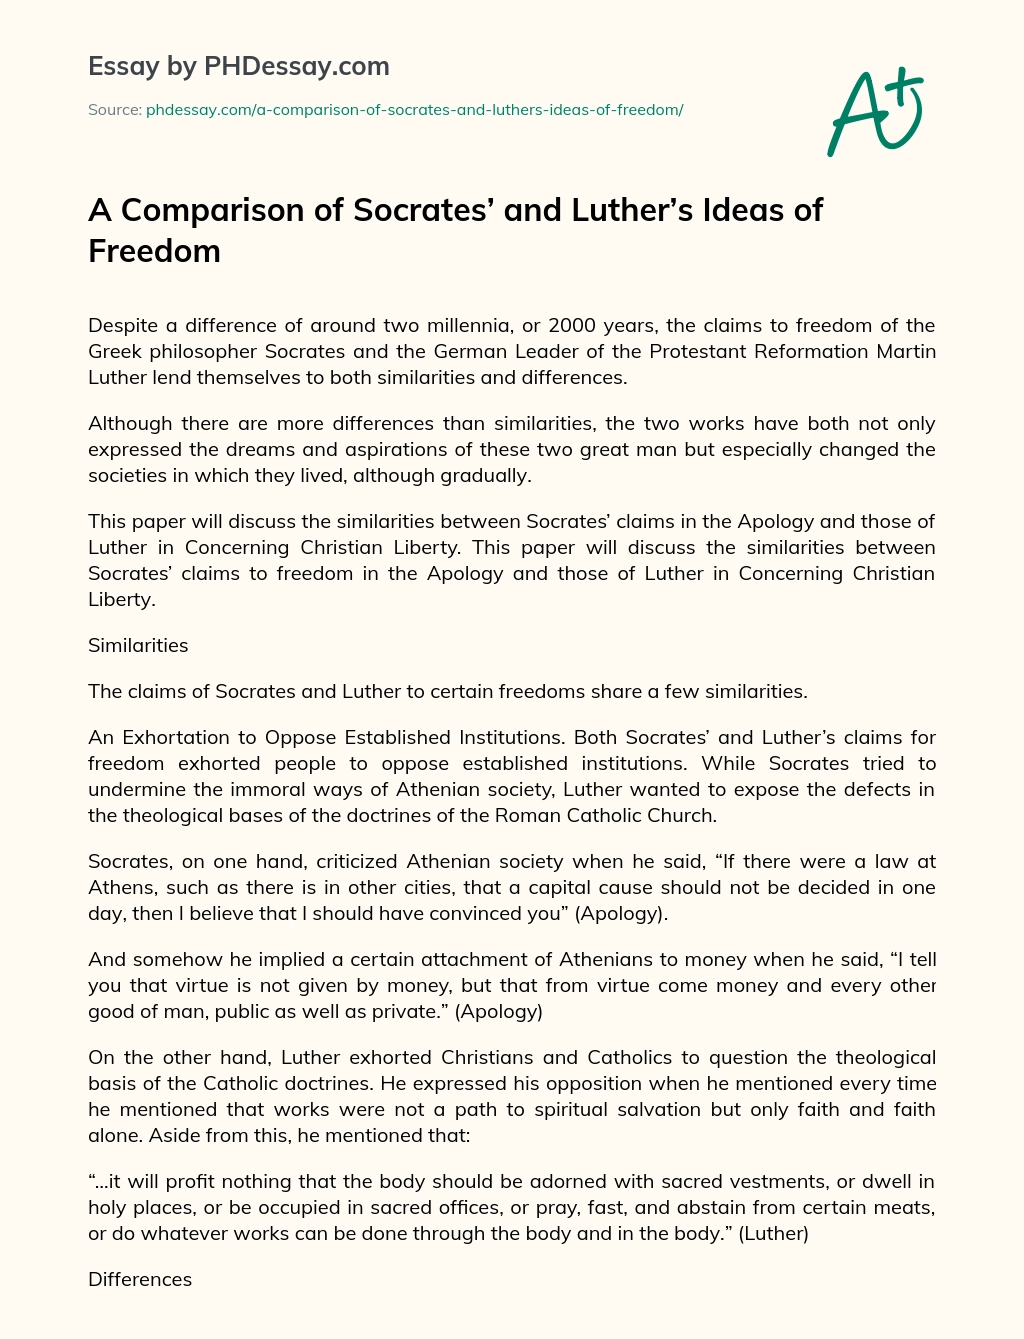 A Comparison of Socrates’ and Luther’s Ideas of Freedom essay